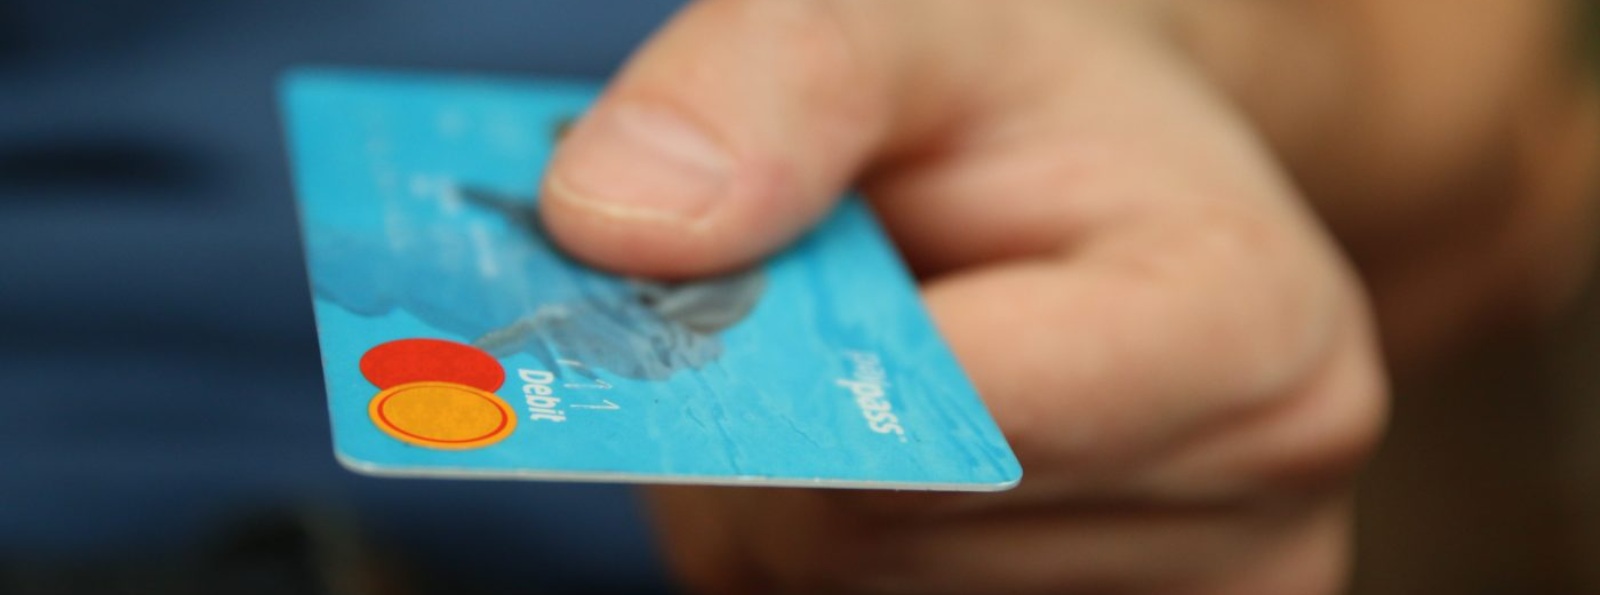 a hand holding a credit or debit card